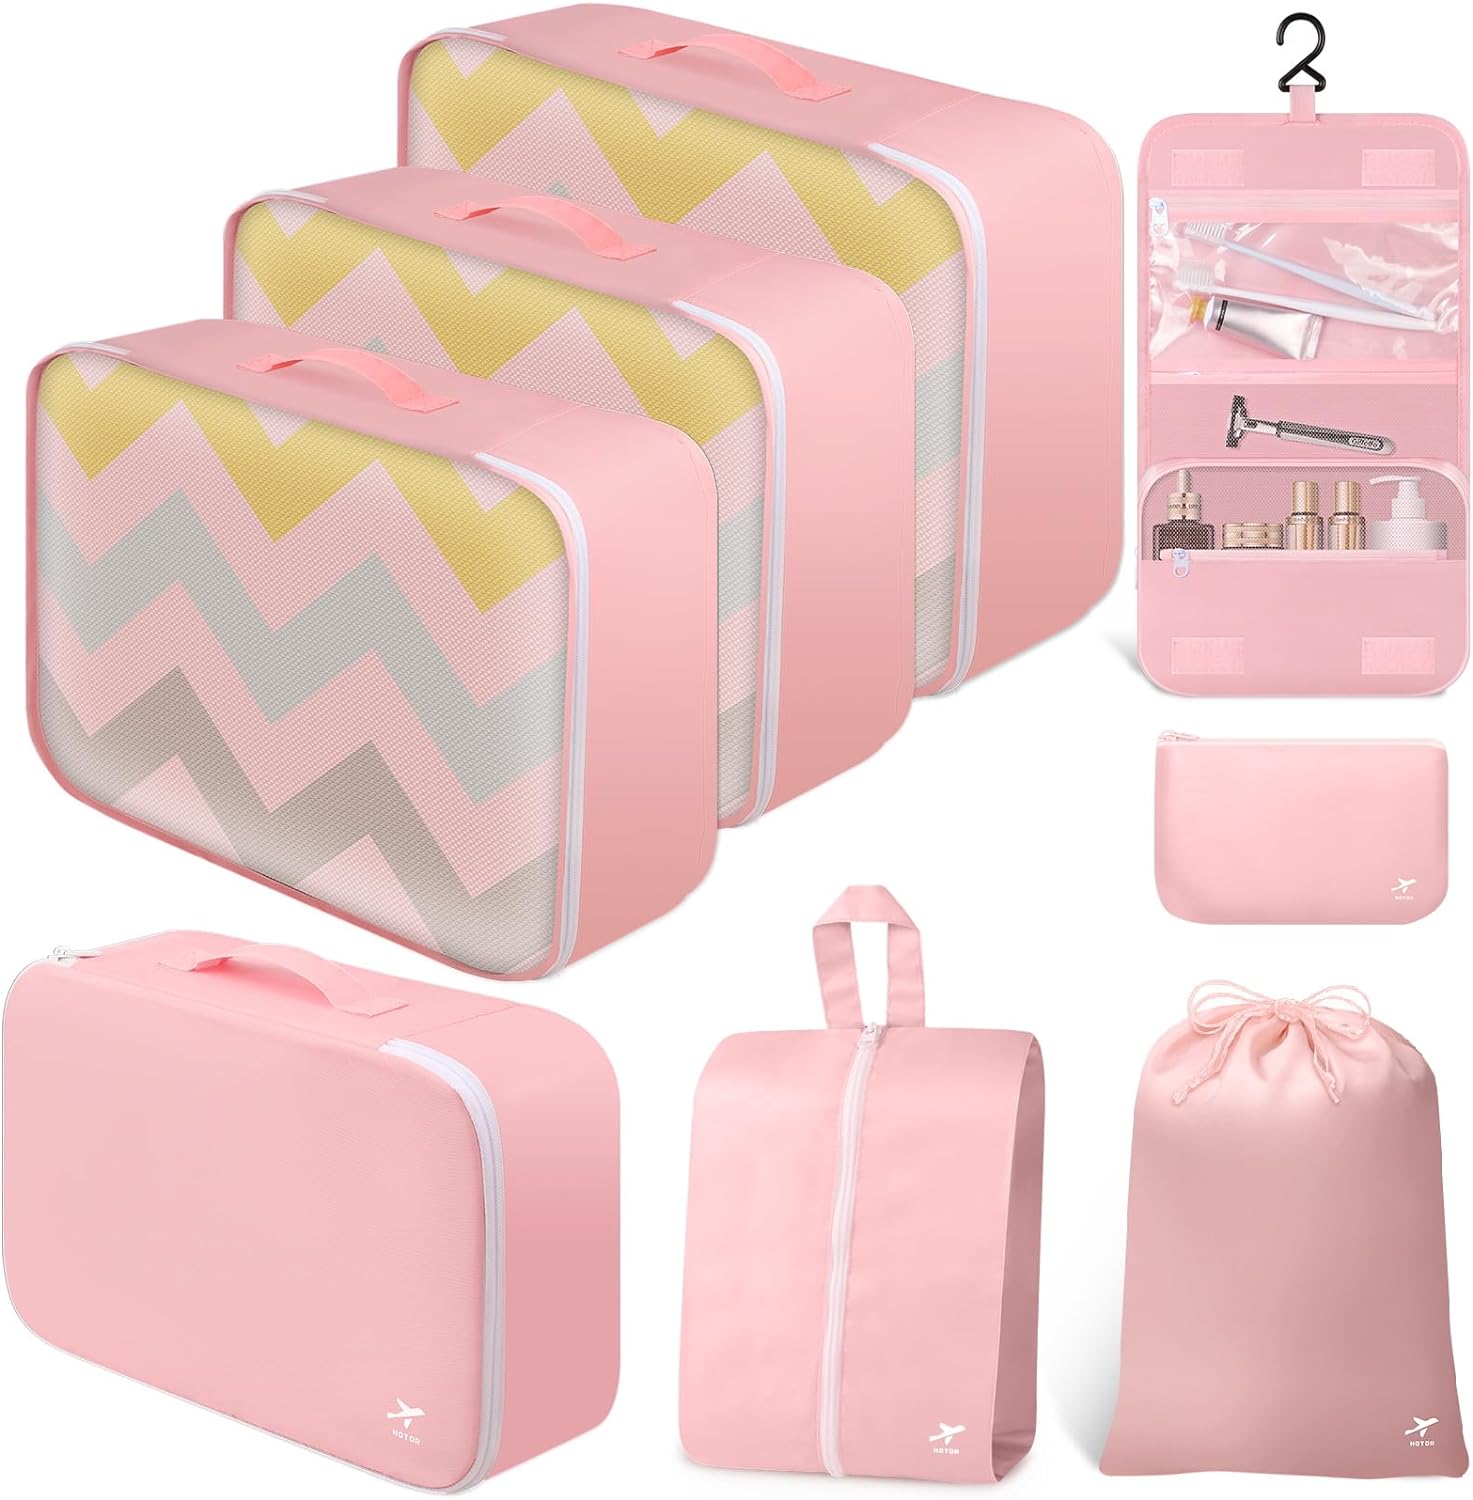 HOTOR Packing Cubes for Suitcases - 8 Pieces, Light Packing Cubes for Travel, Premium Suitcase Organizer Bags Set, Space-Saving Luggage Organizers for Suitcase, Water-Resistant Travel Essentials, Pink